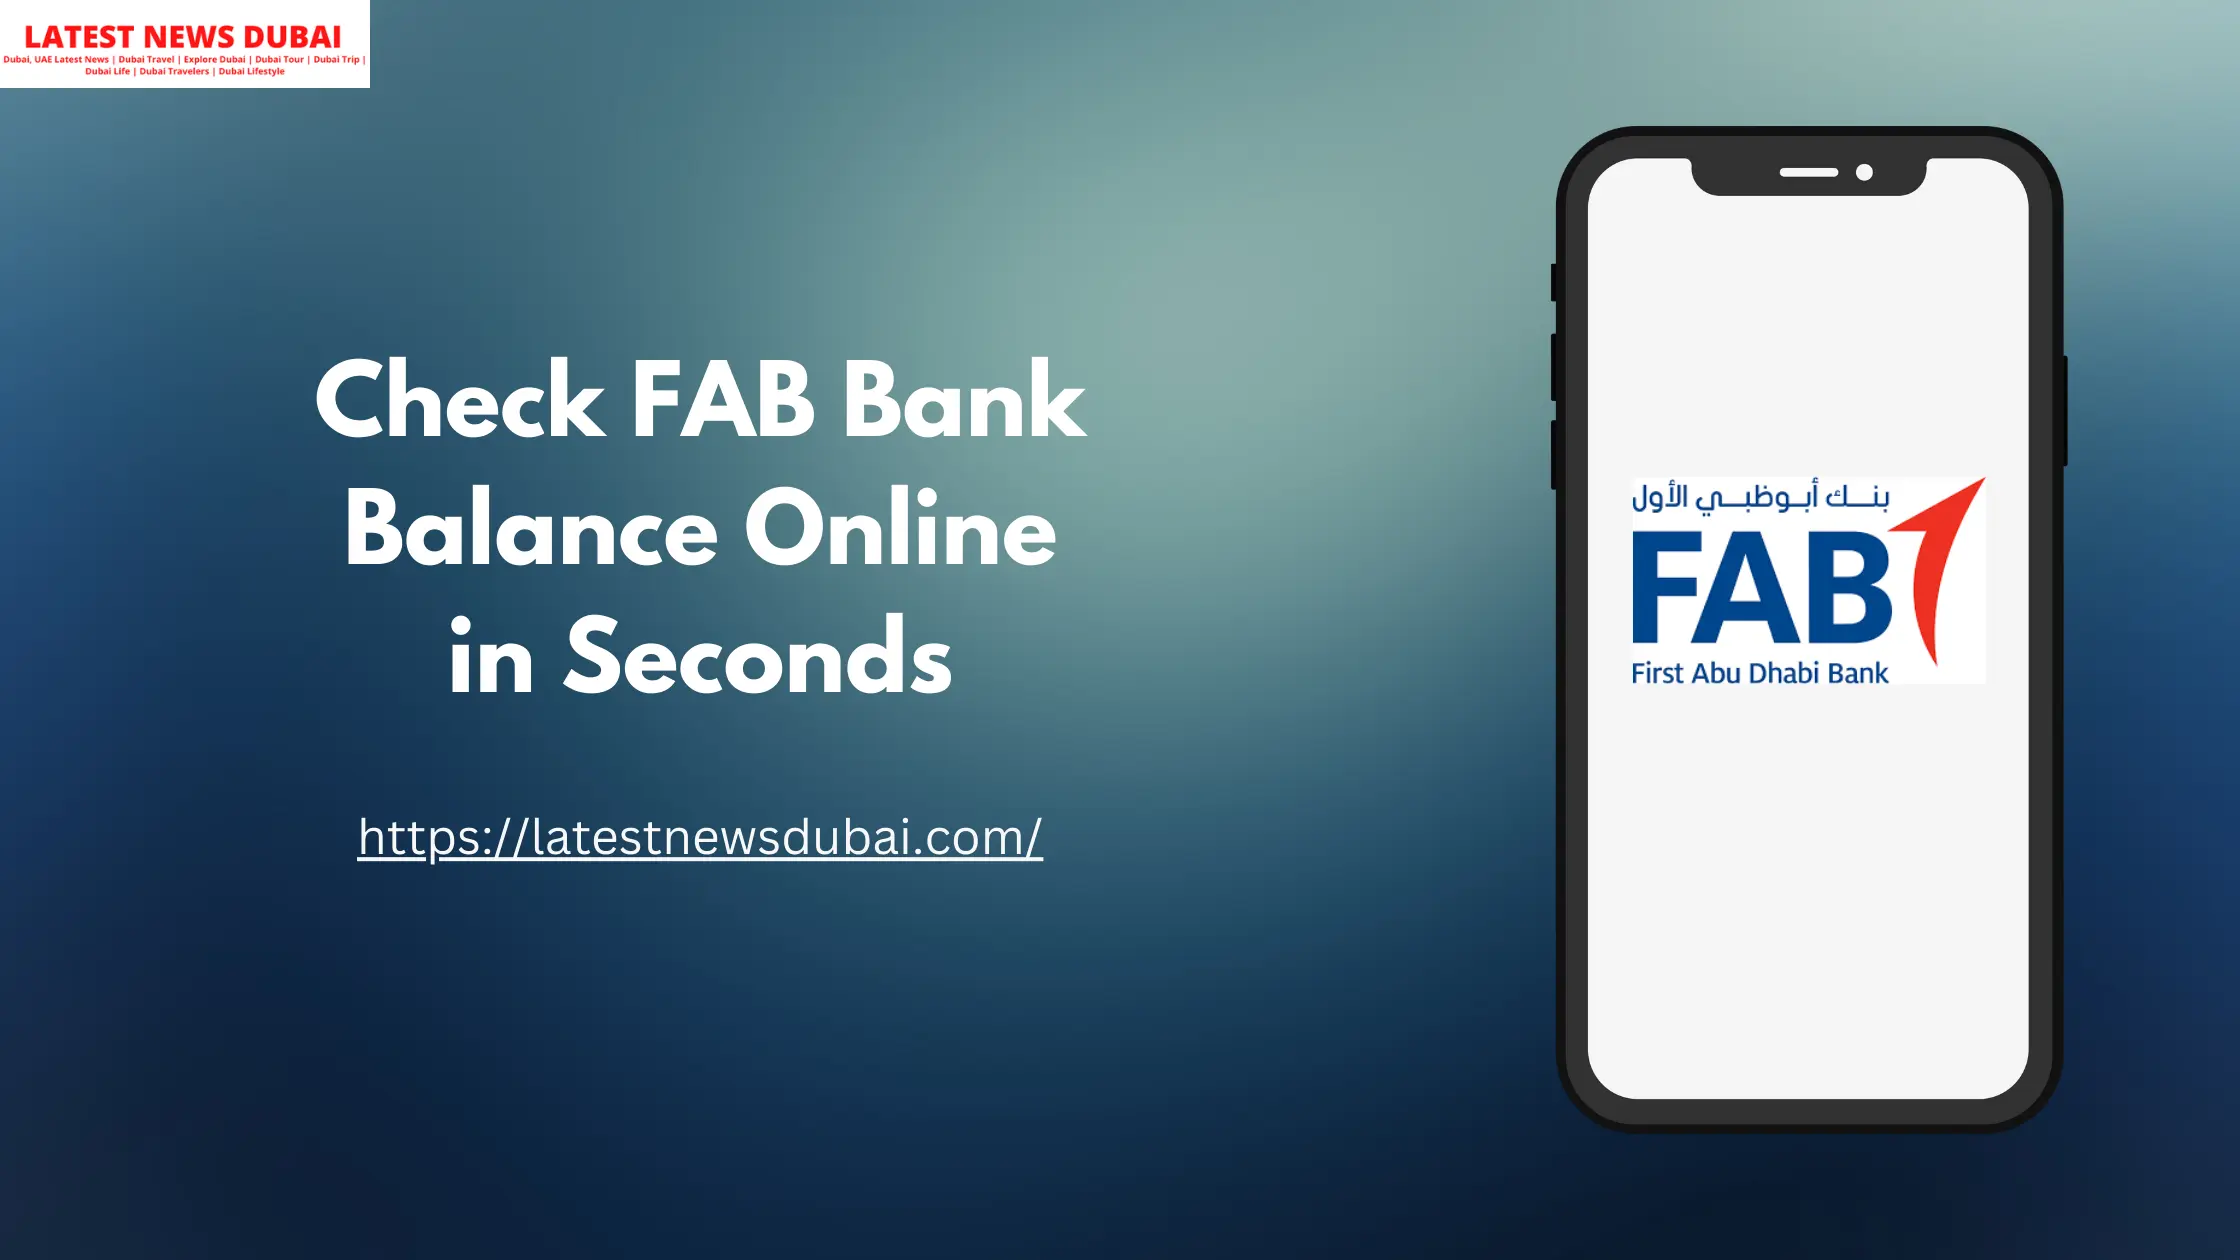 Online FAB Bank Balance Check in Seconds